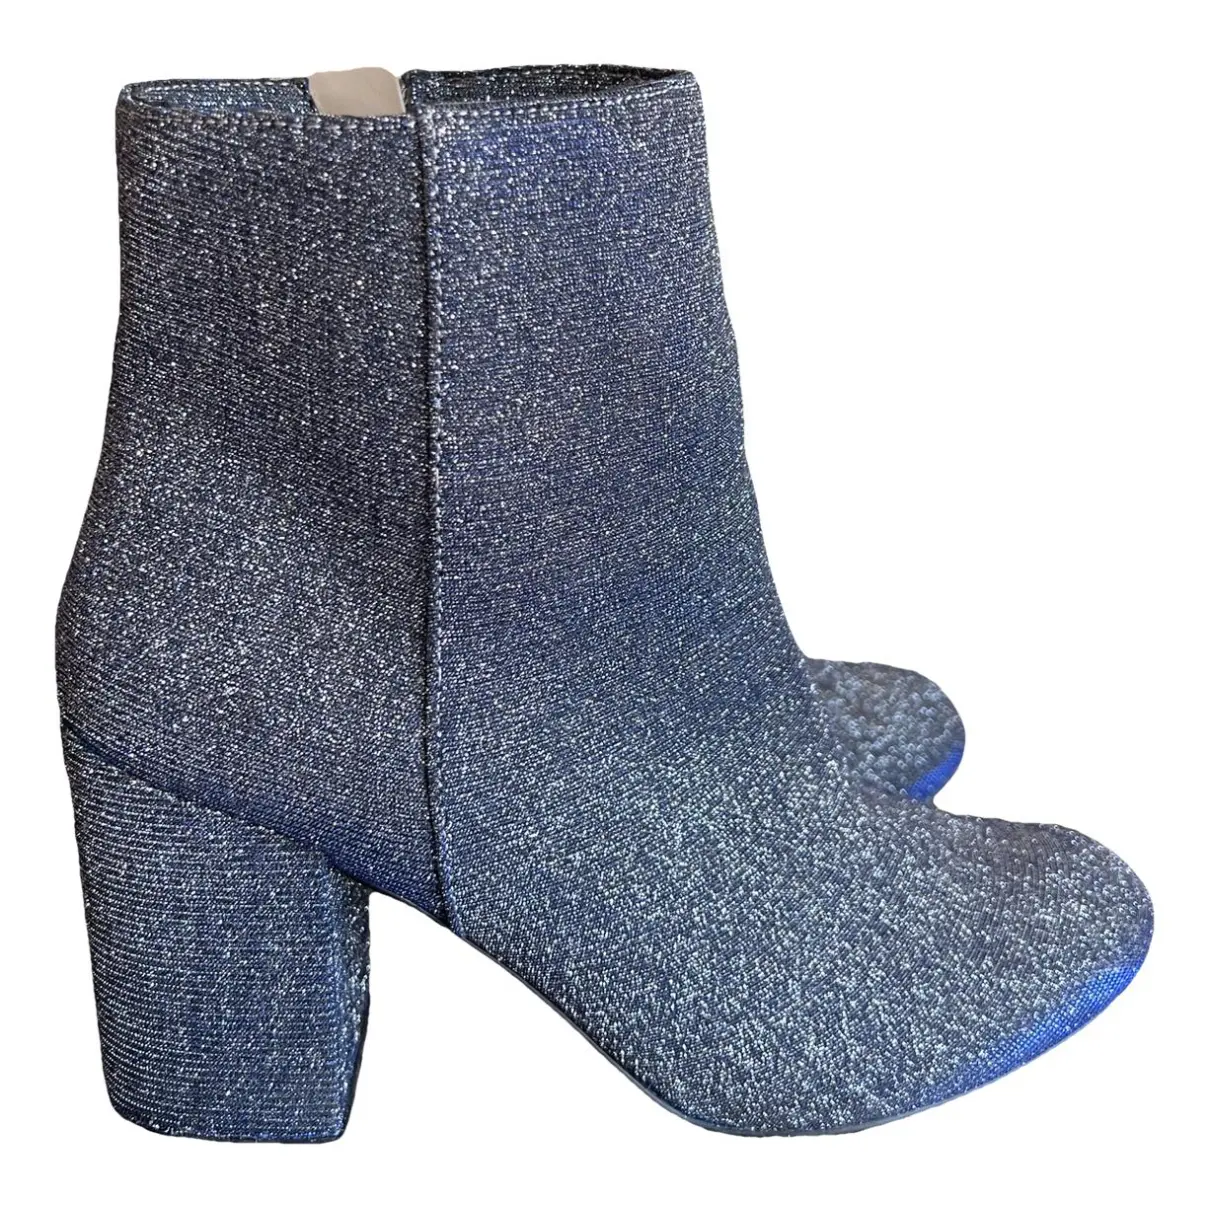 Glitter ankle boots